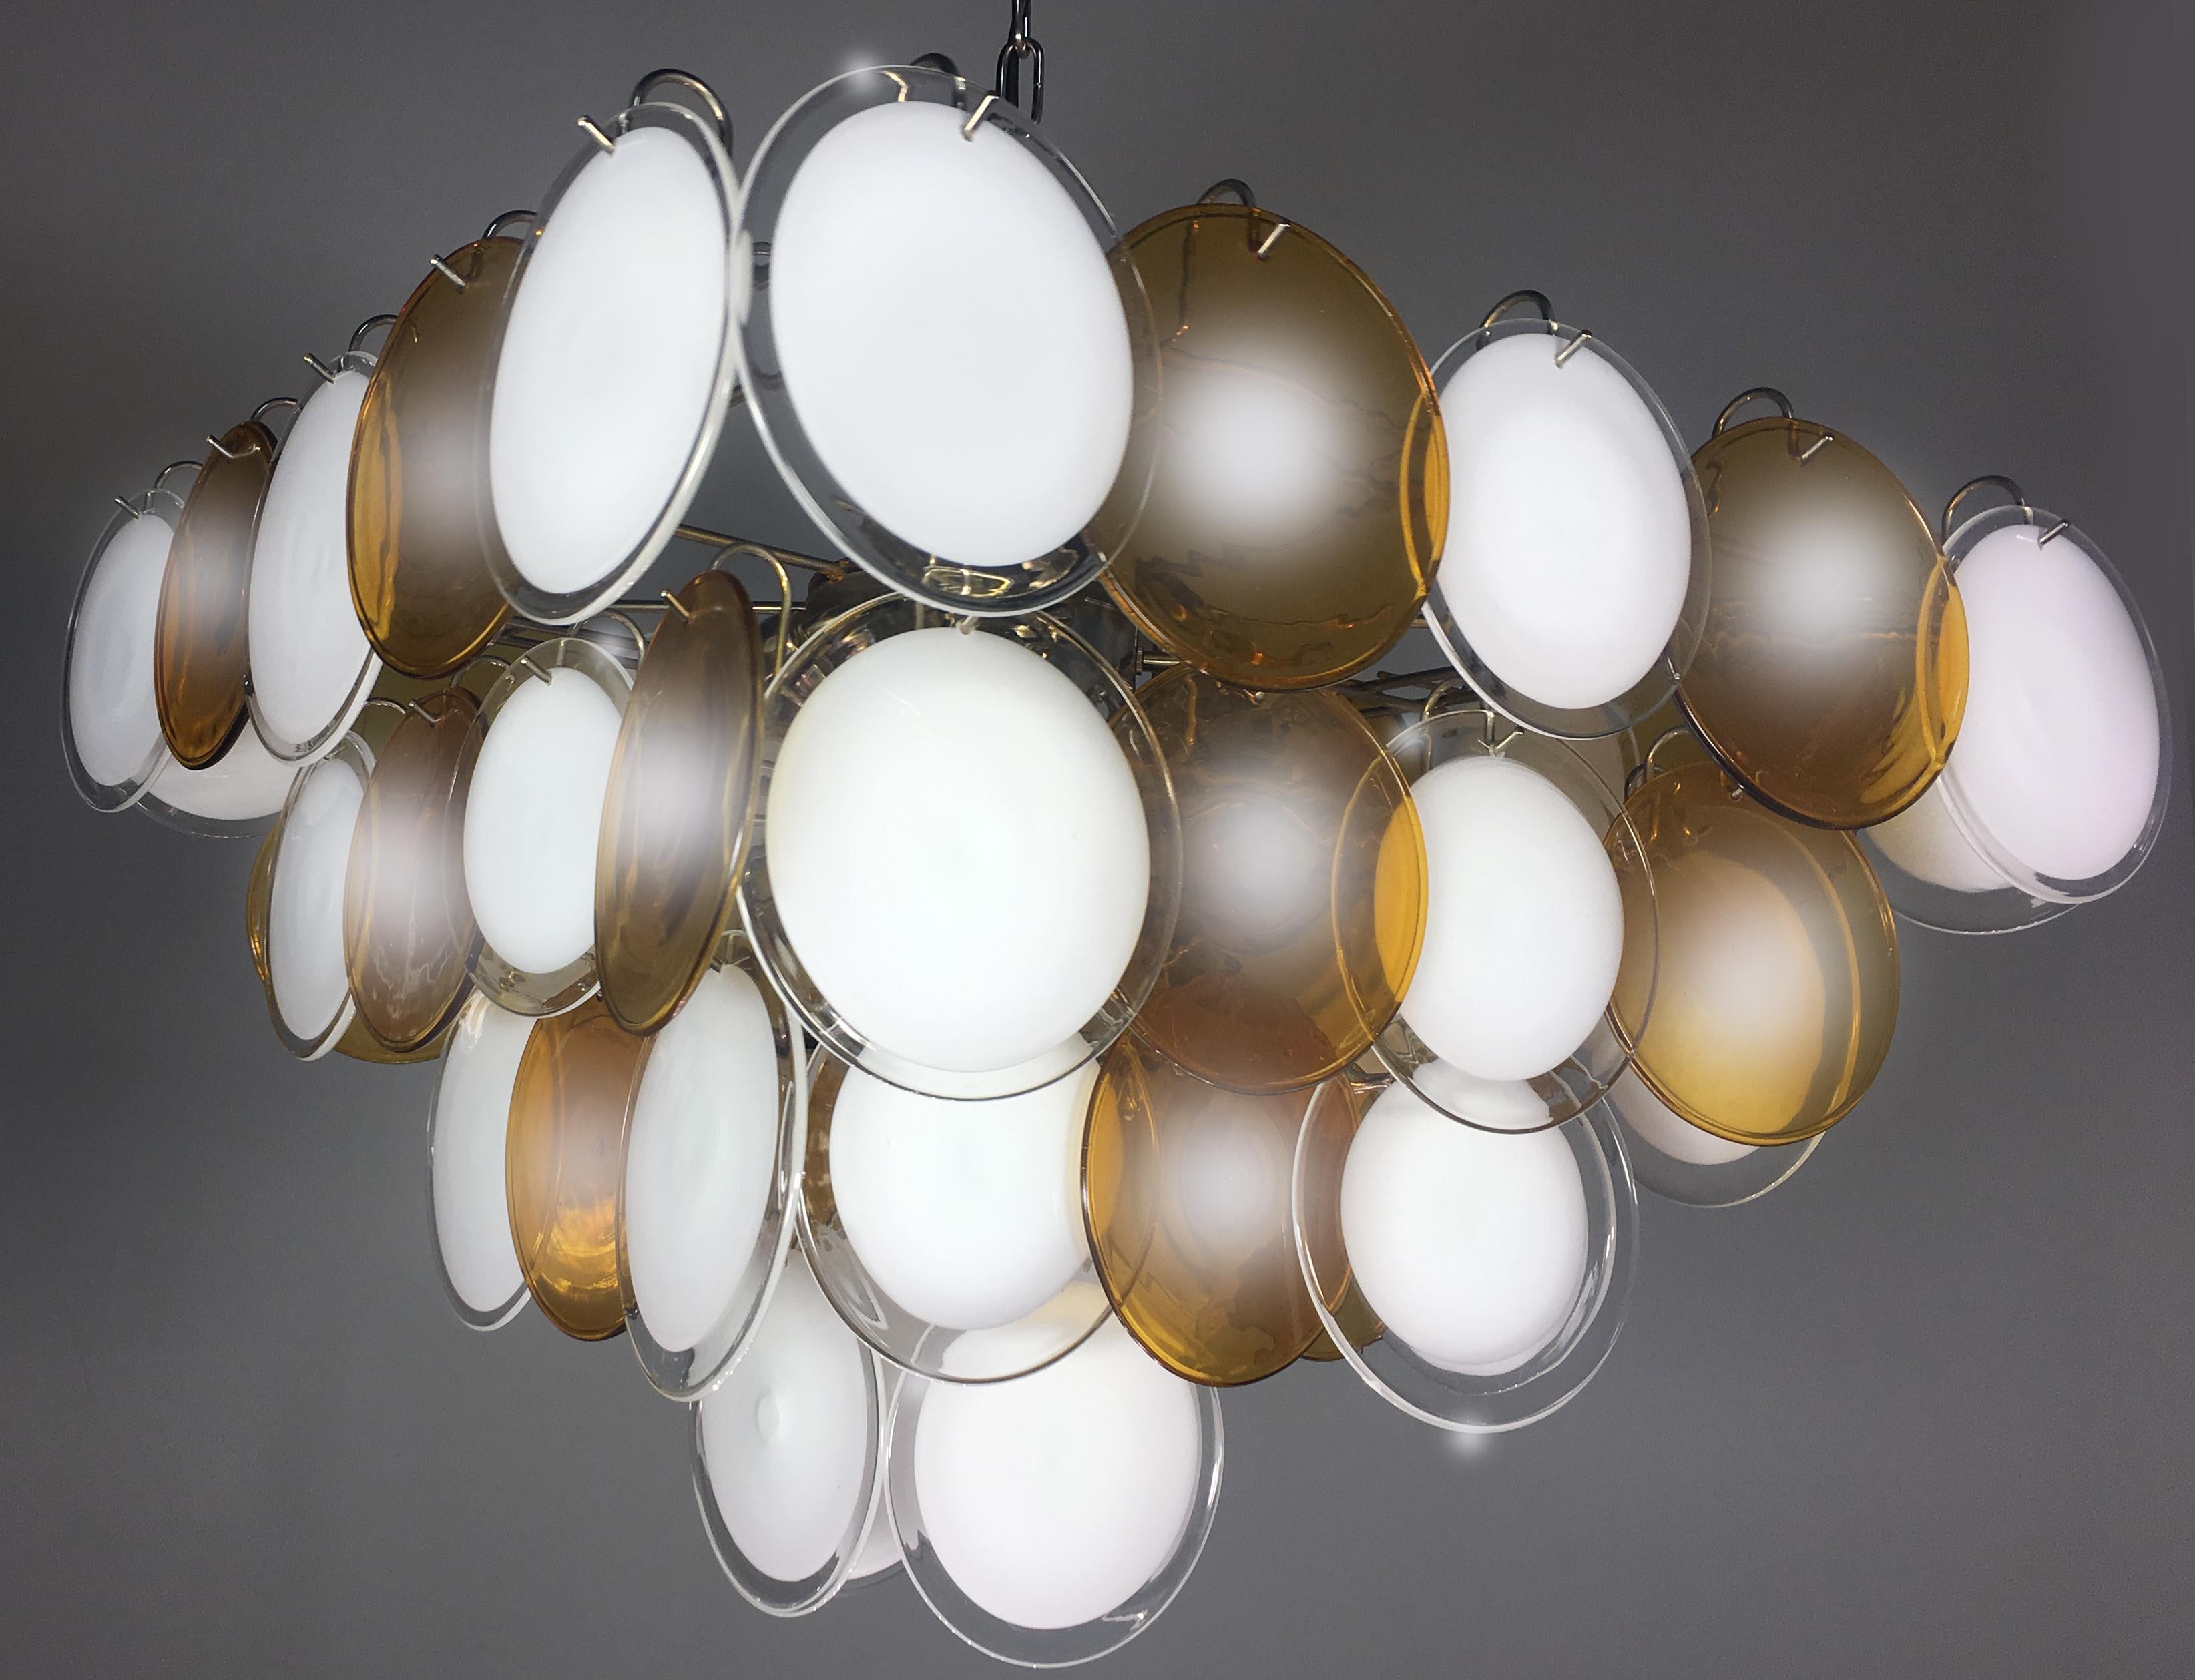 Each chandelier is made of 52 white and amber discs of precious Murano glass are arranged on four levels. Nine lights.